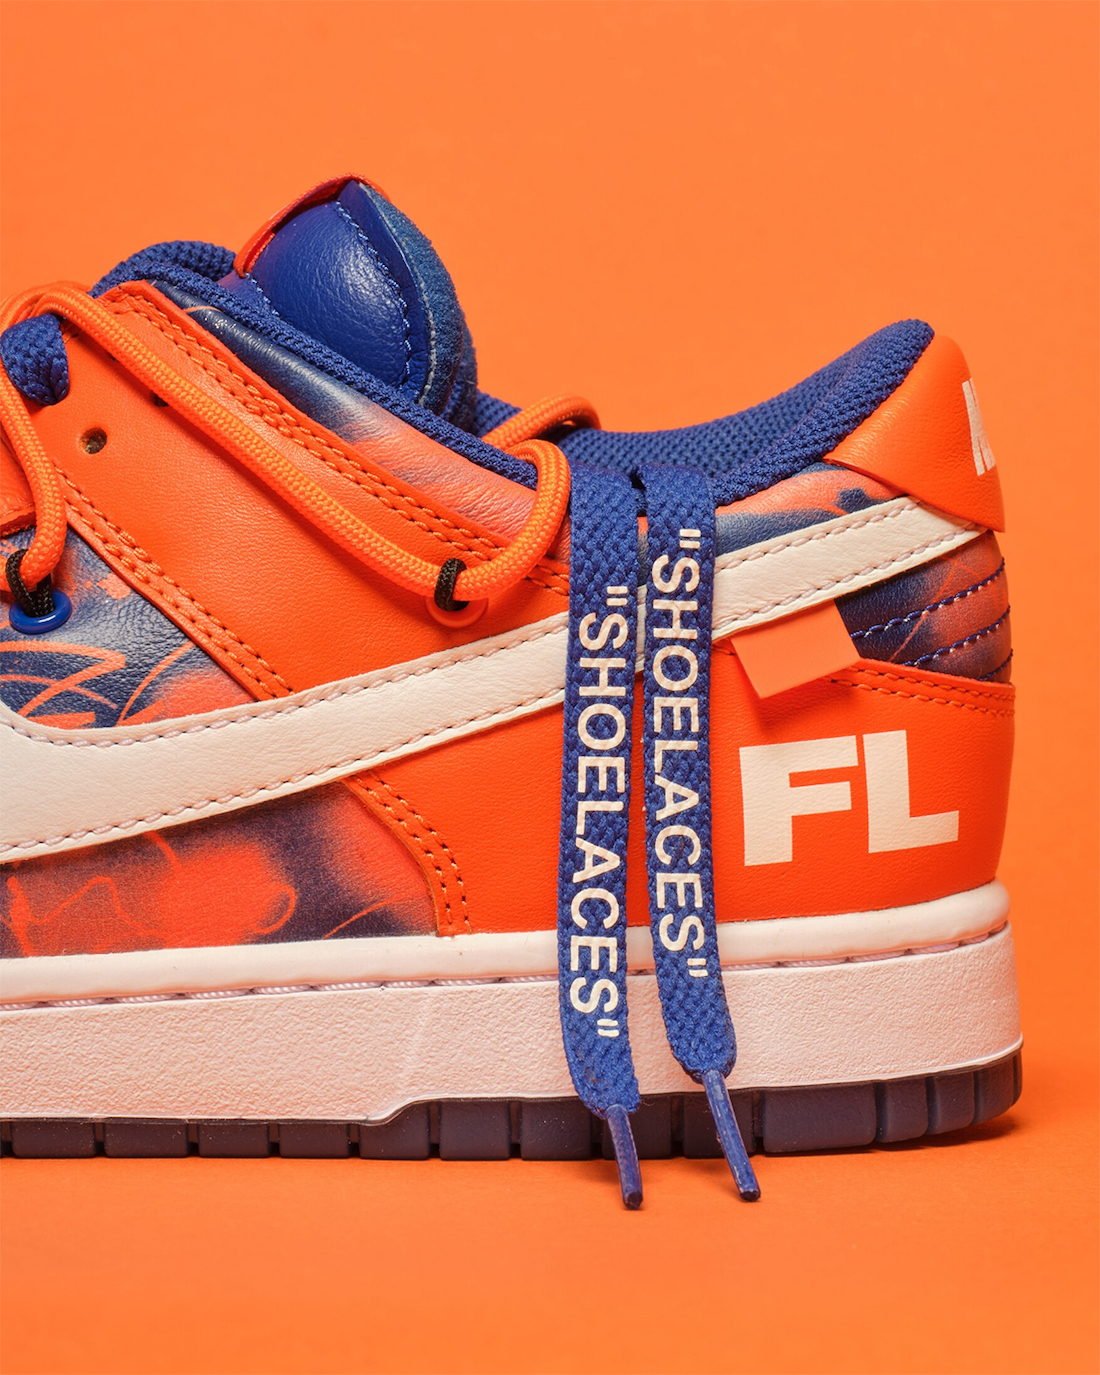 Off-White x Futura x Nike Dunk Lows Available at Auction | LaptrinhX / News